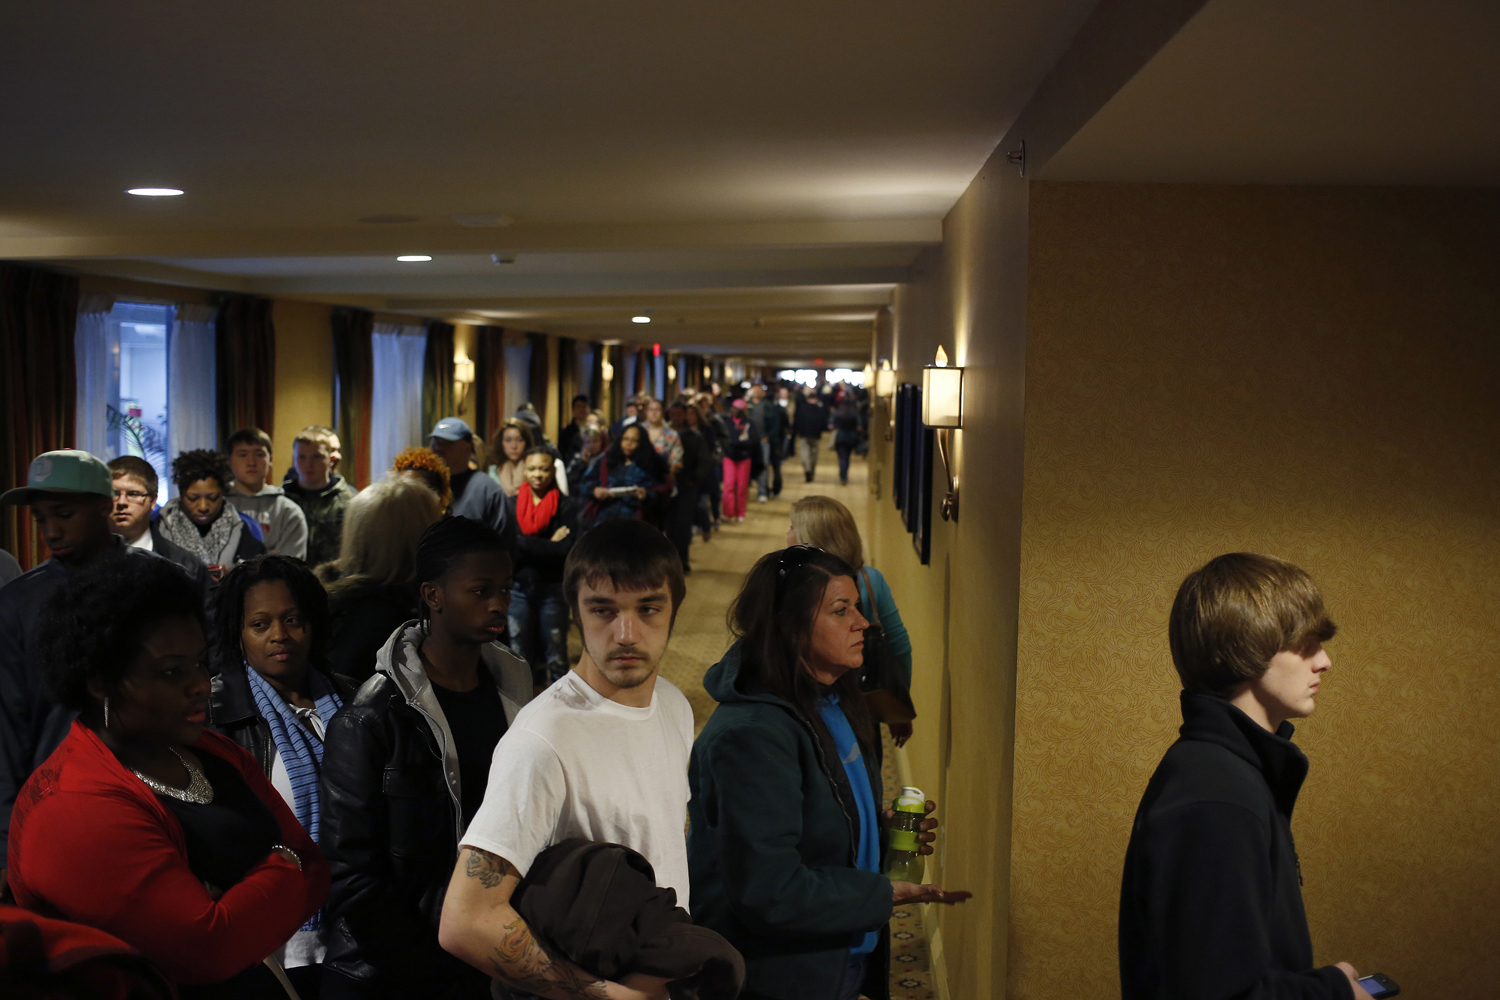 Prospective job applicants wait in line to learn about job openings at the Kentucky Kingdom Amusement Park during a job fair at the nearby Crowne Plaza Hotel in Louisville, Ky., Jan. 4, 2013. 